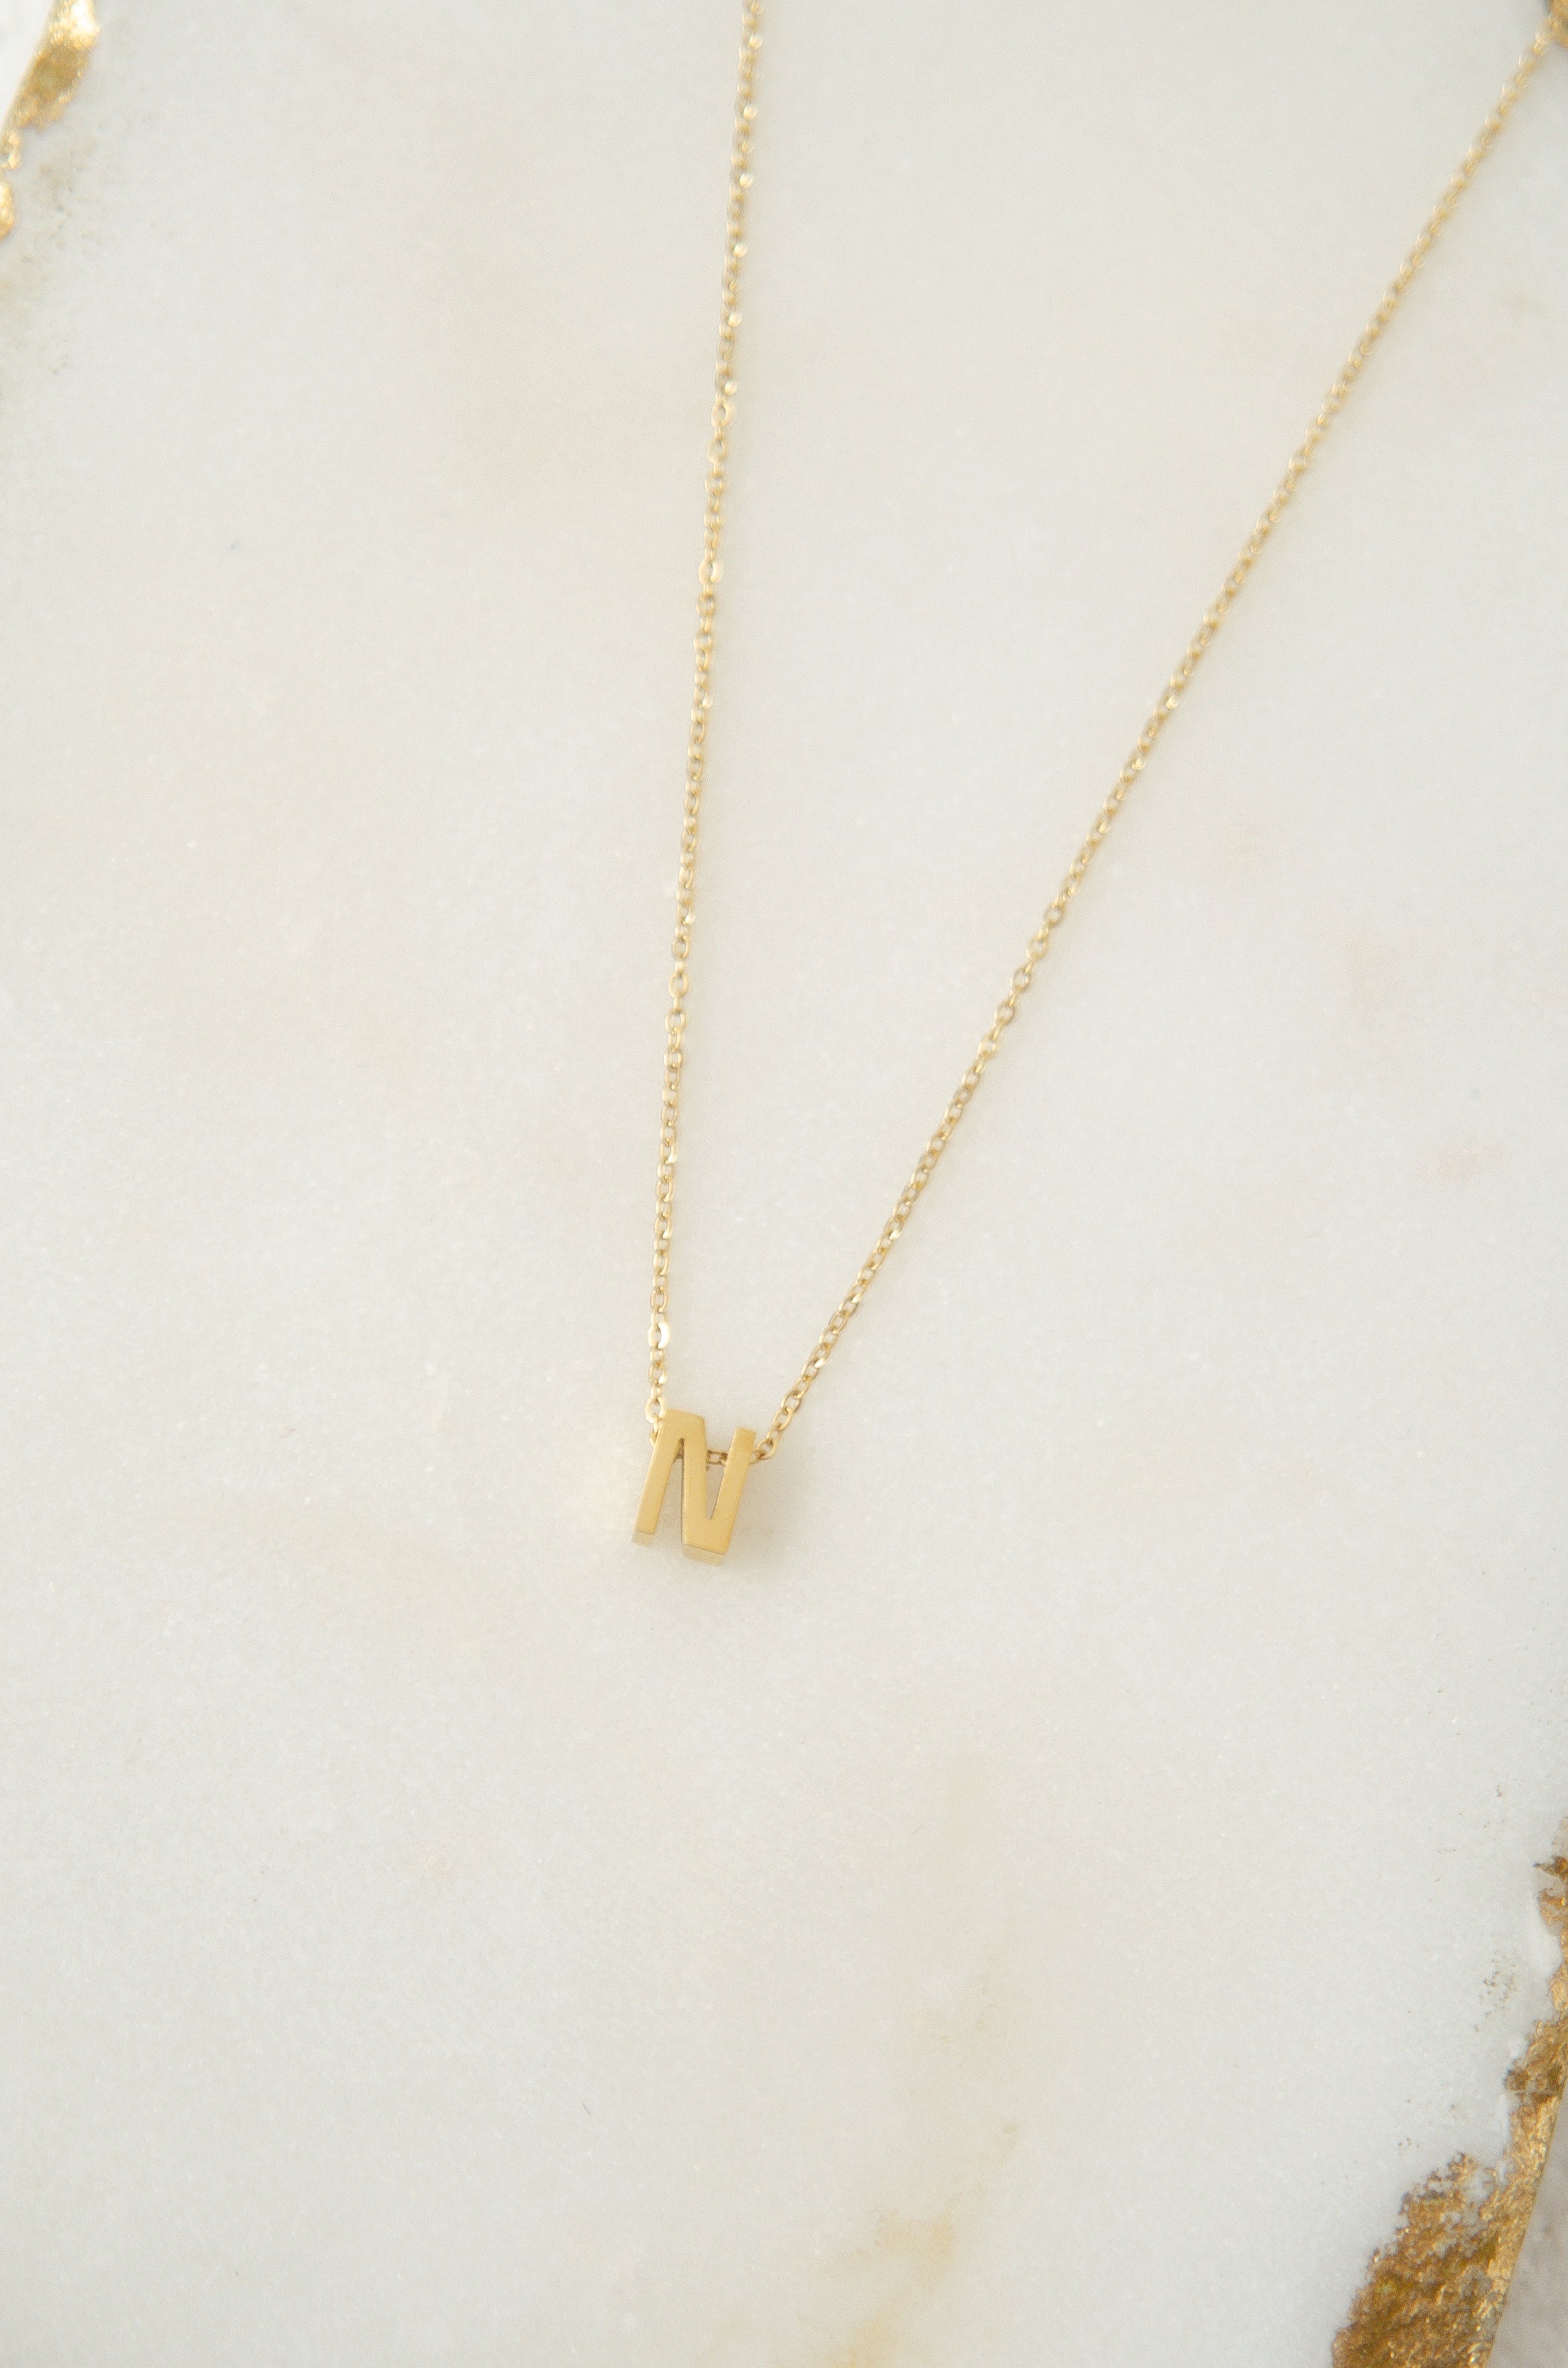 LETTERS NECKLACE // N